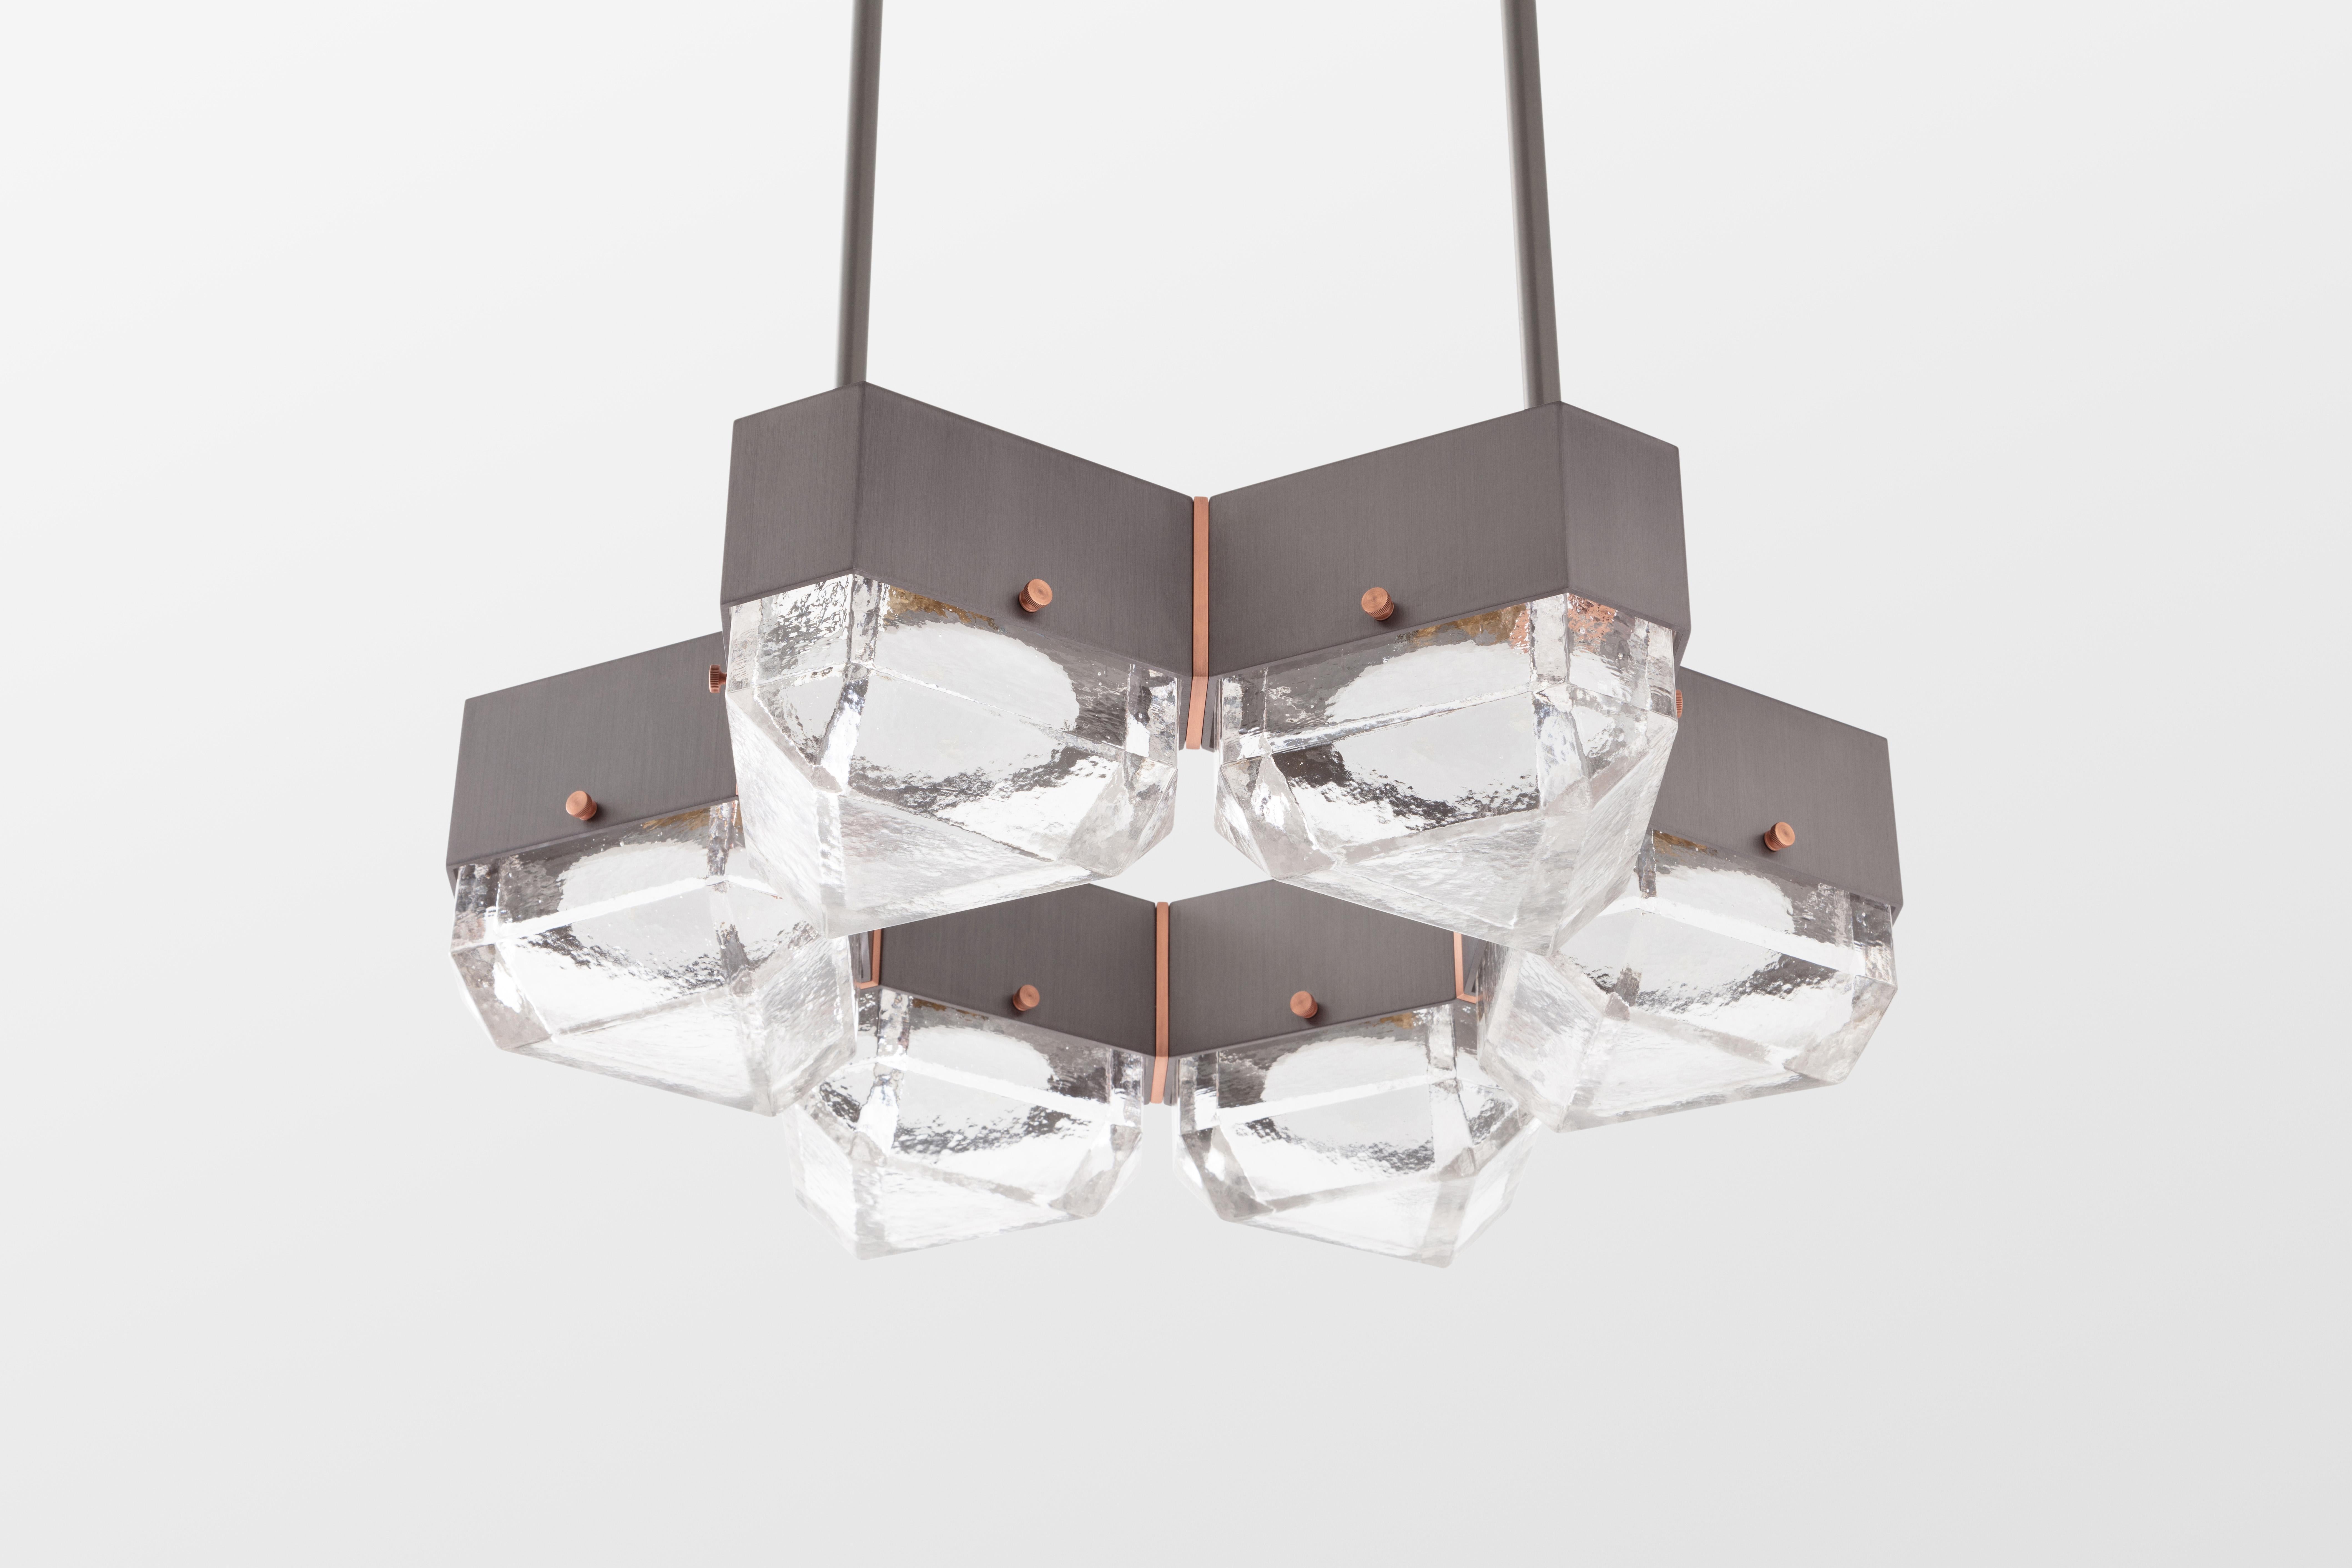 Vega is a geometric, modular, contemporary lighting fixture. The body is made from extruded aluminum with brass accents. The diffusers are available in cast glass. No external driver is necessary since Vega is outfitted with fully dimmable, warm